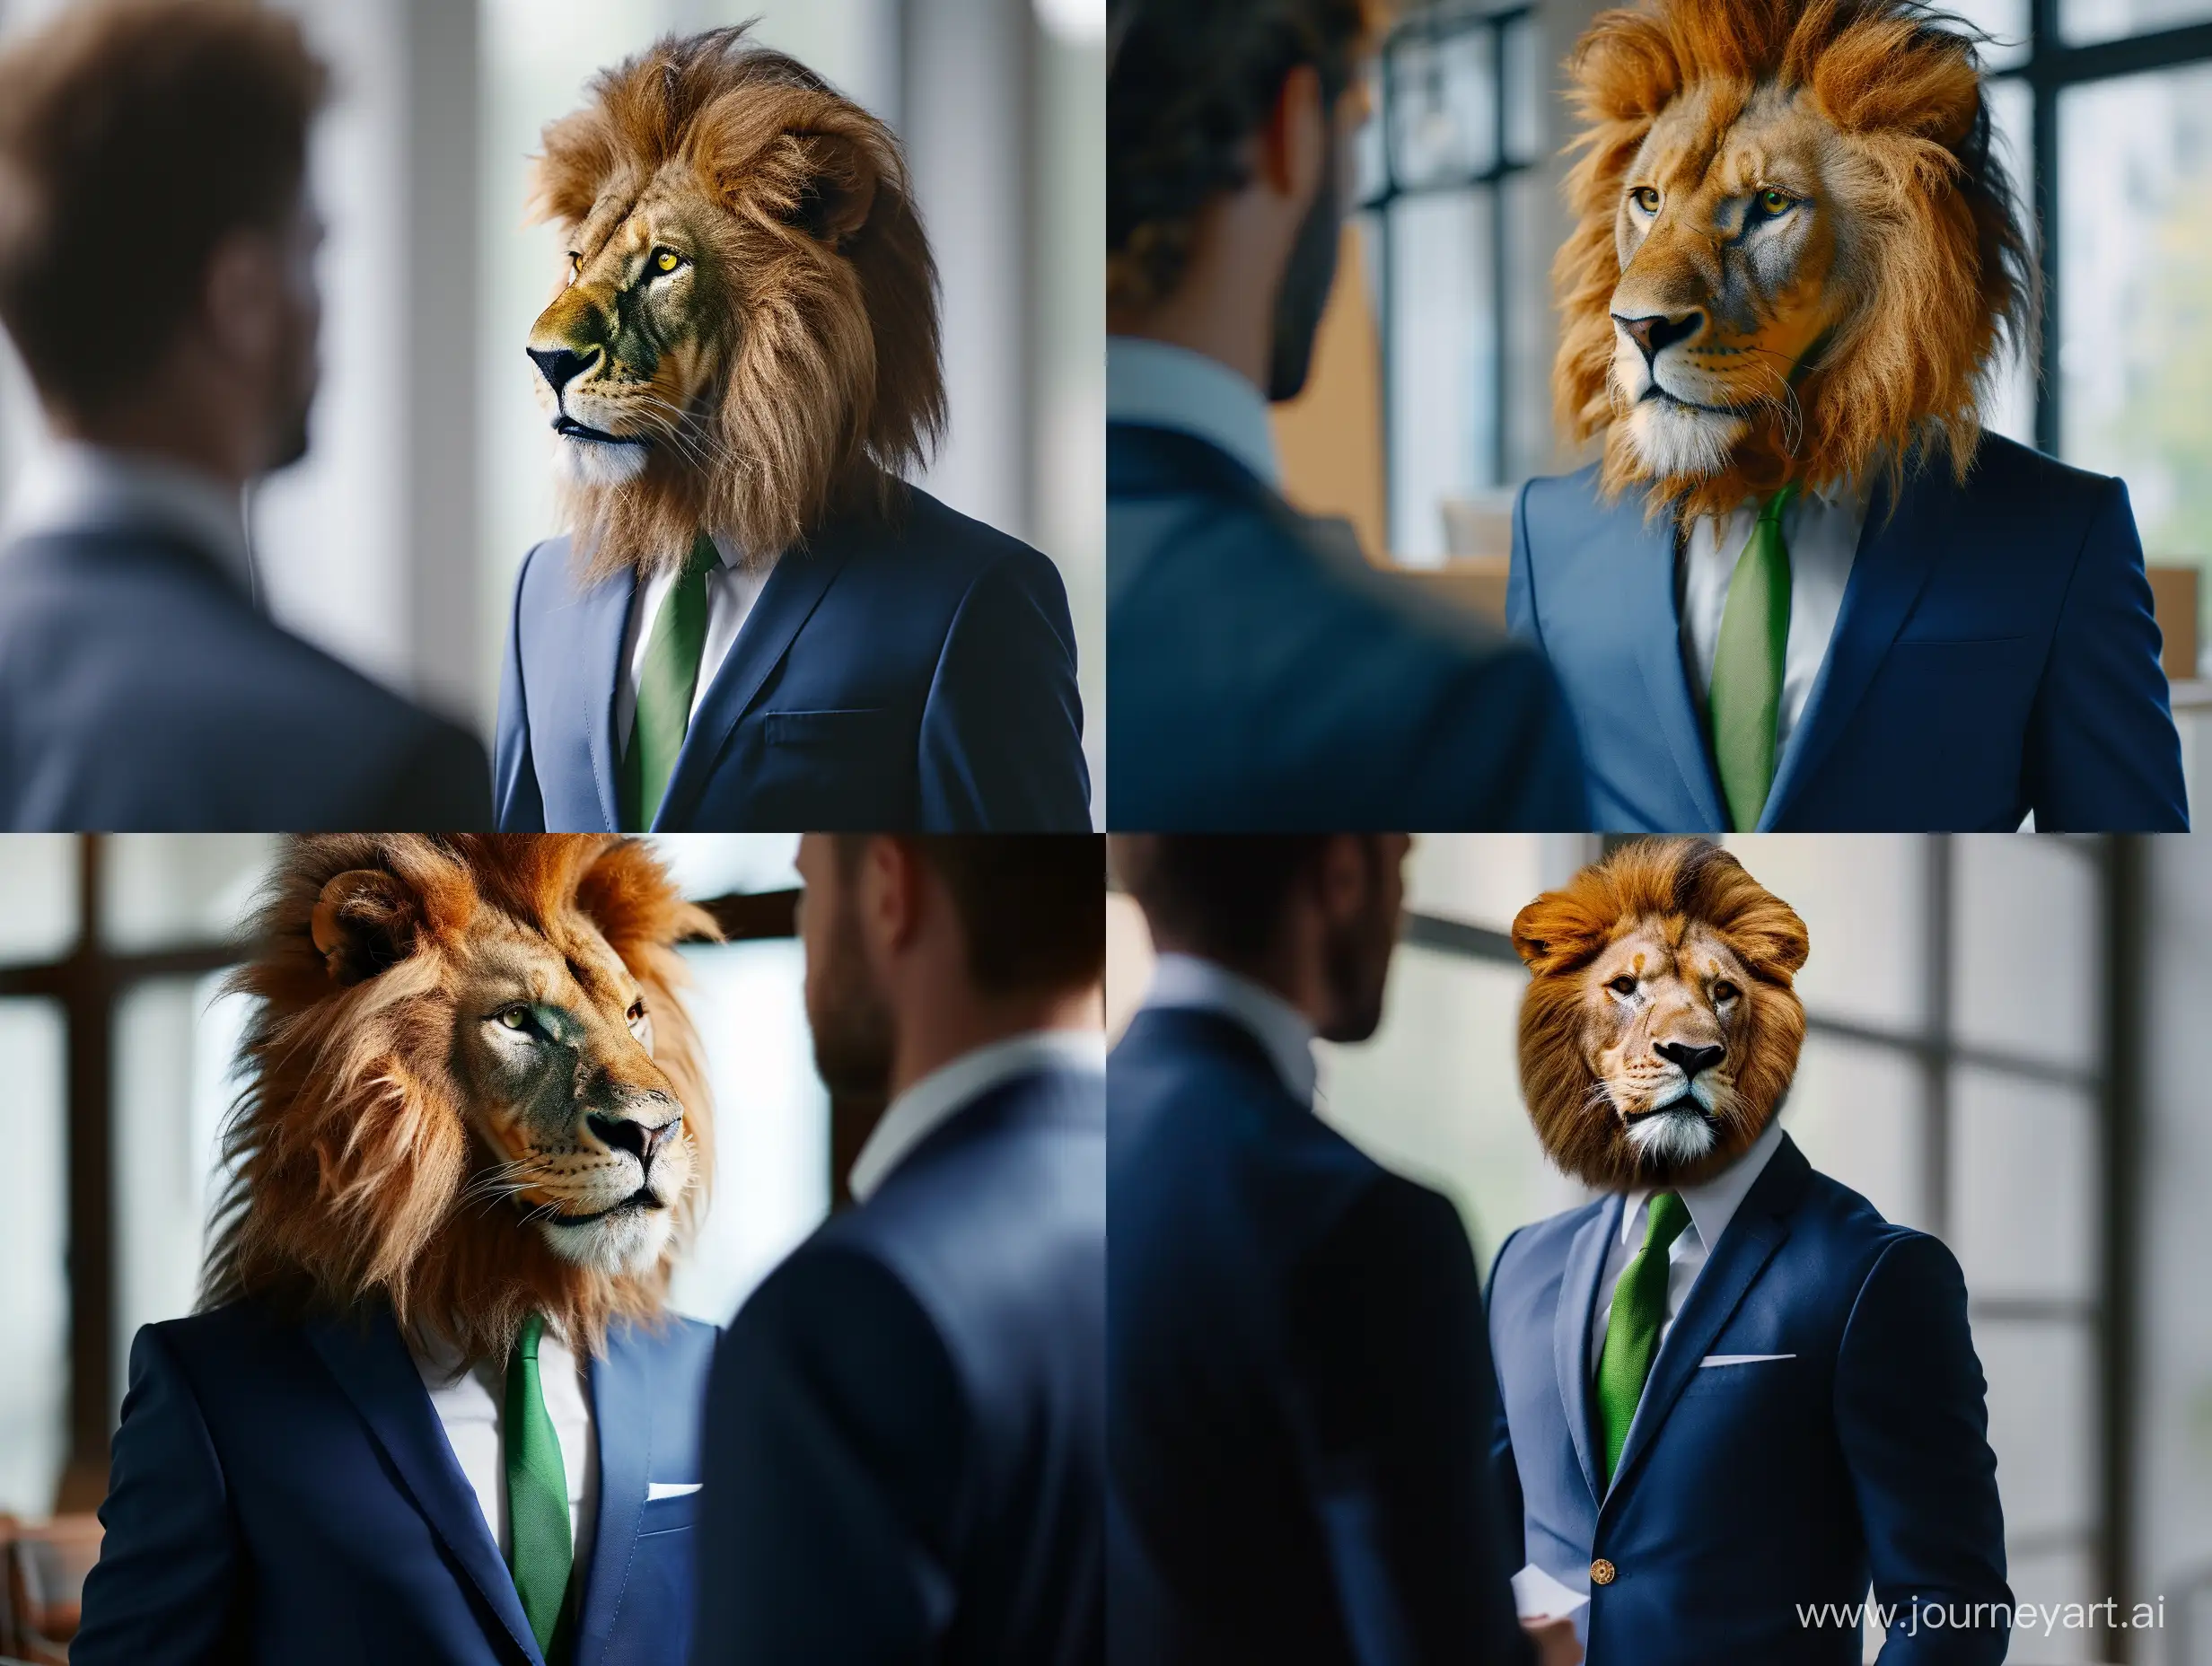 LionHeaded-Professional-in-Blue-Suit-Communicates-with-Client